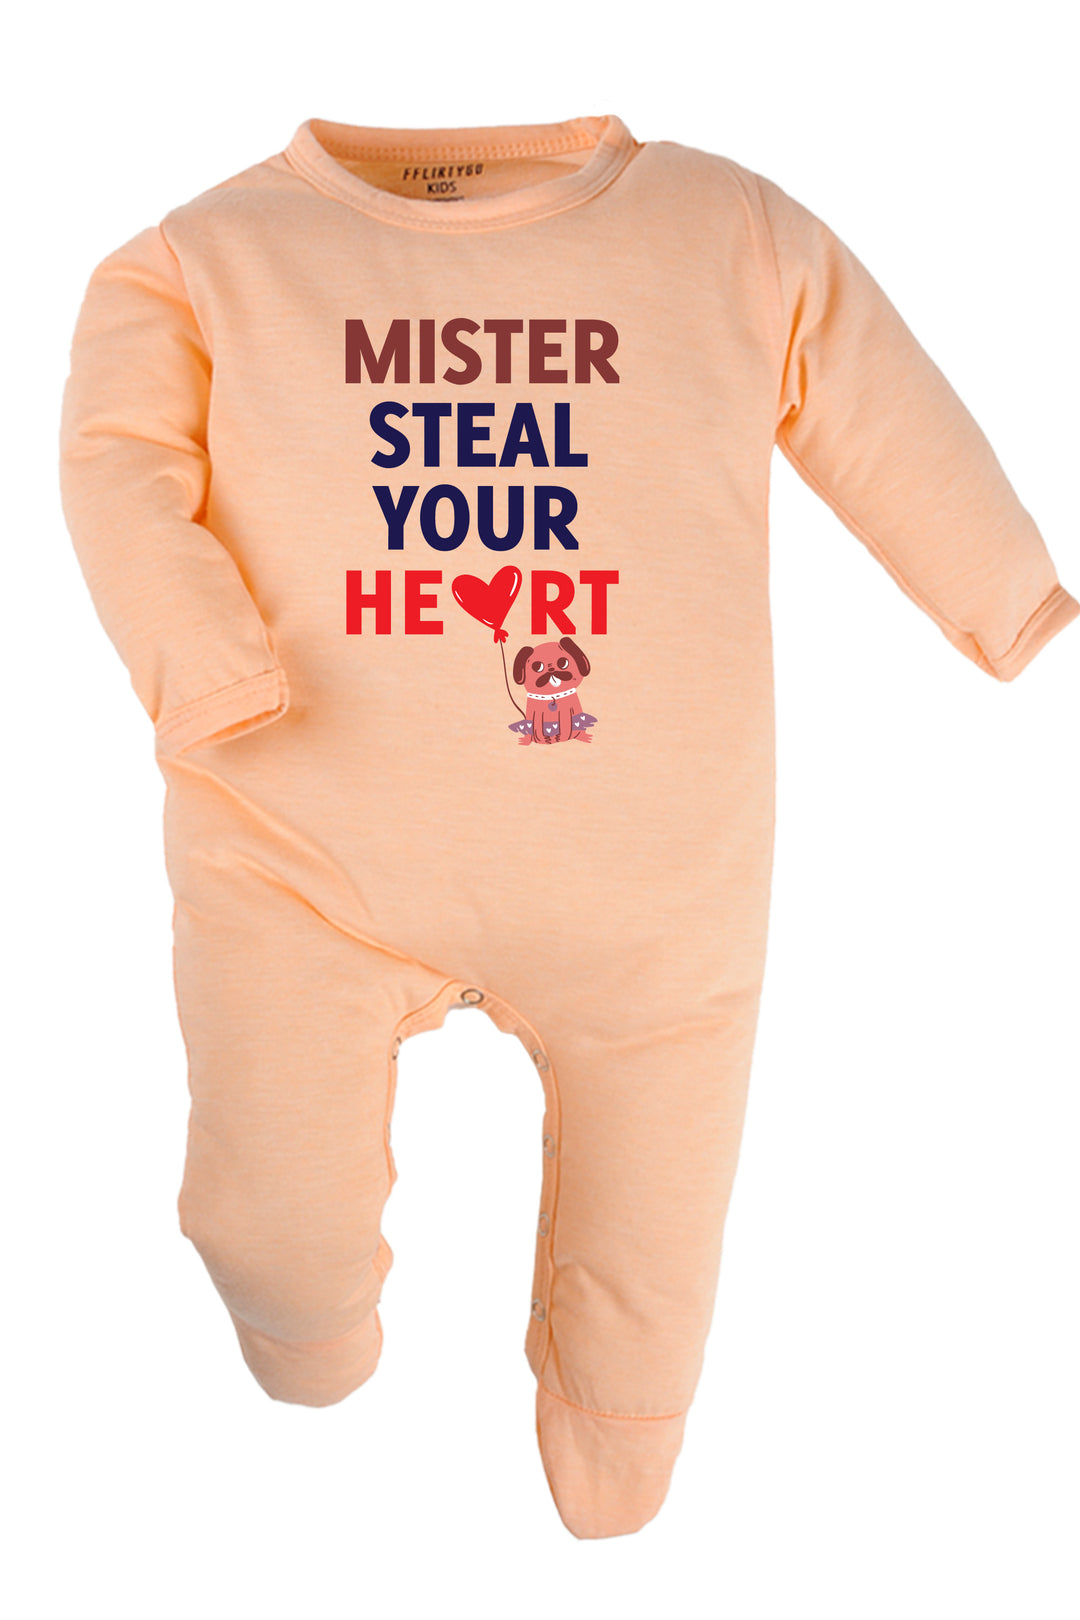 Mister Steal your heart Baby Romper | Onesies